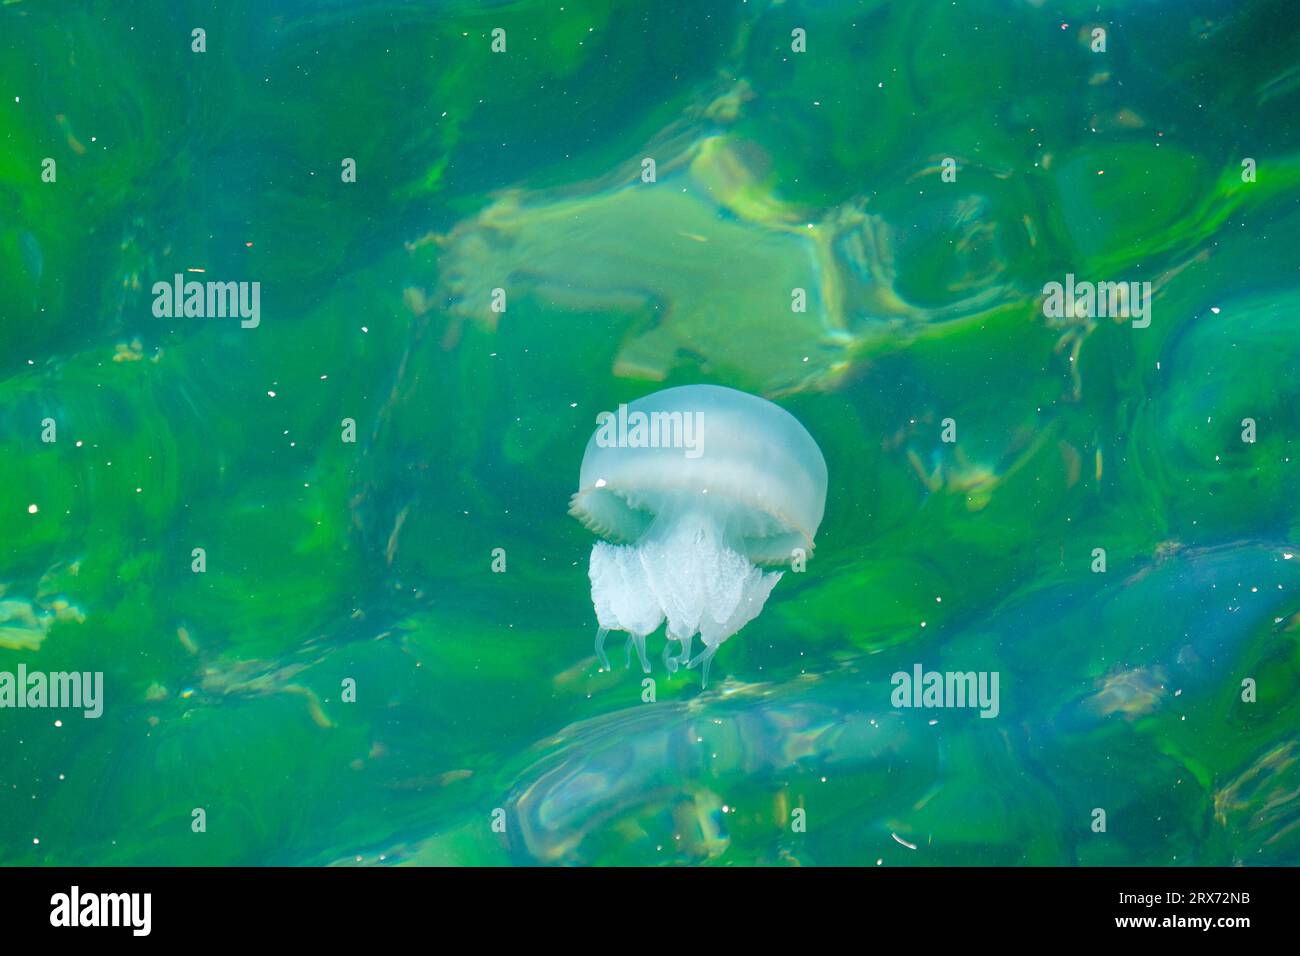 Close up poisonous jelly fish medusae inside blue green sea water. Jellyfish sea animal background wallpaper. Stock Photo